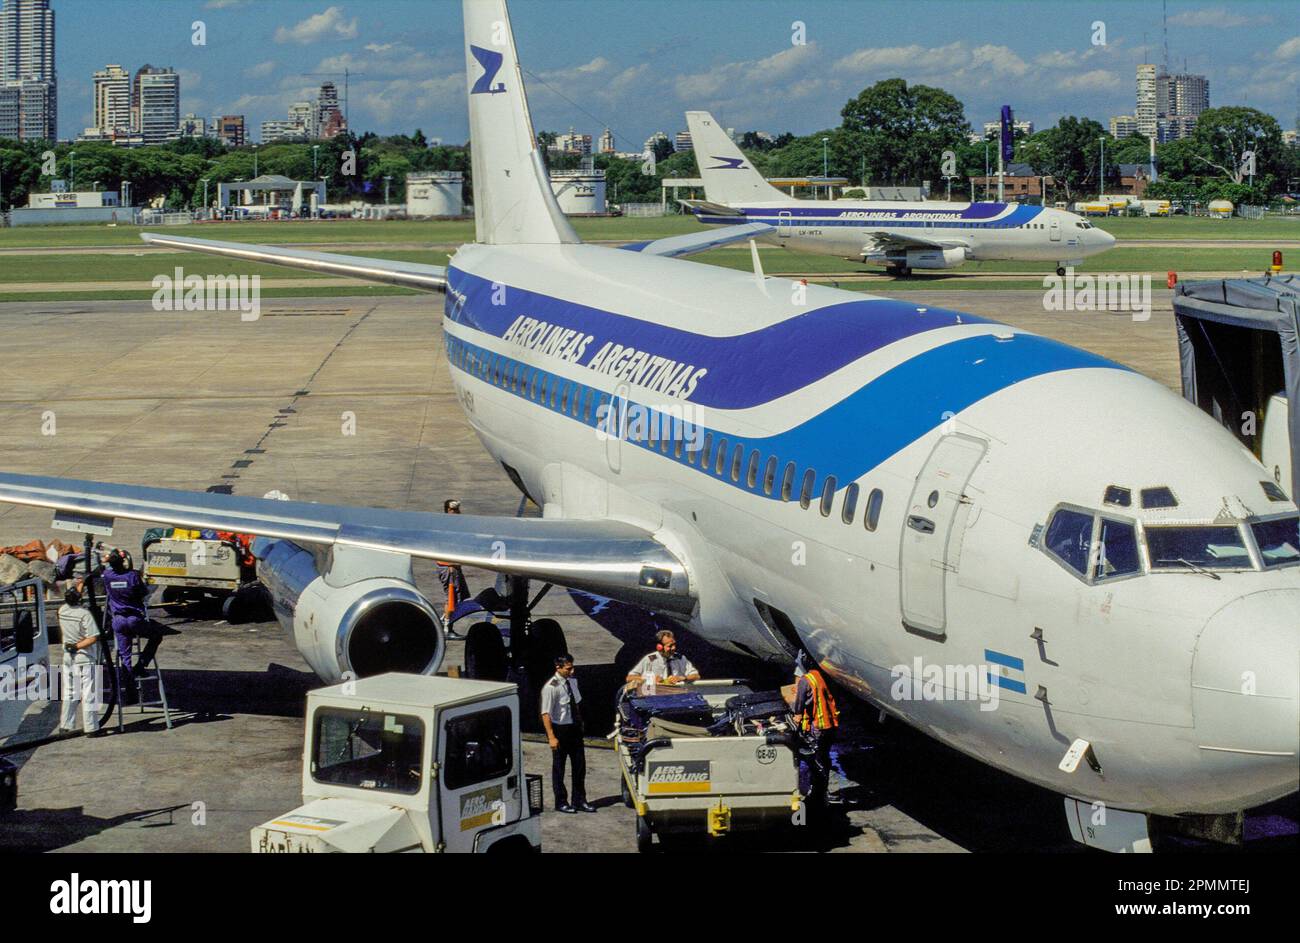 Argentina, Buenos Aires. Aerolineas Argentinas plane at the city airport. Stock Photo